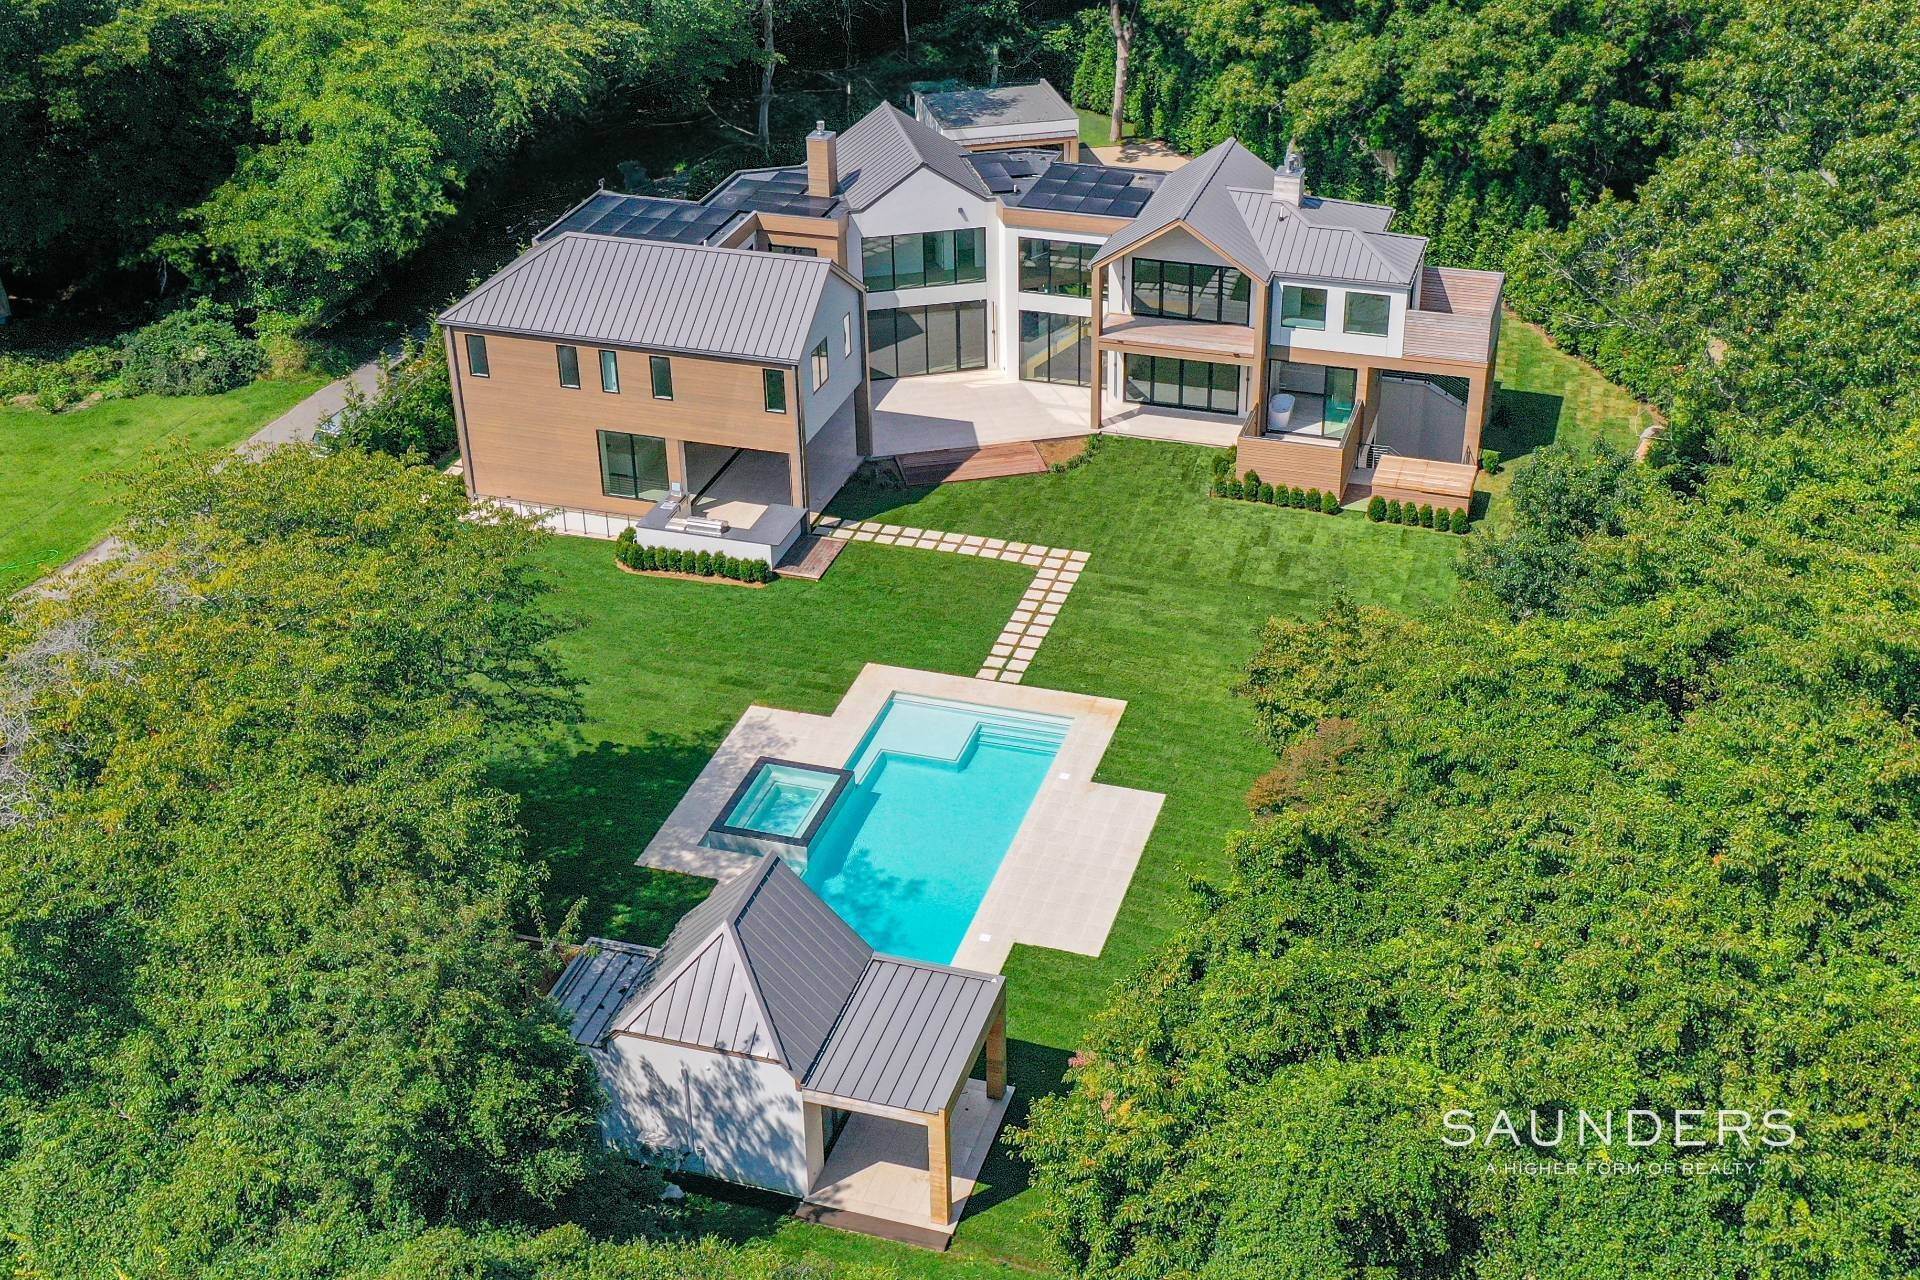 Single Family Homes for Sale at Rare New Construction In East Hampton 6 Marley Lane, East Hampton, NY 11937